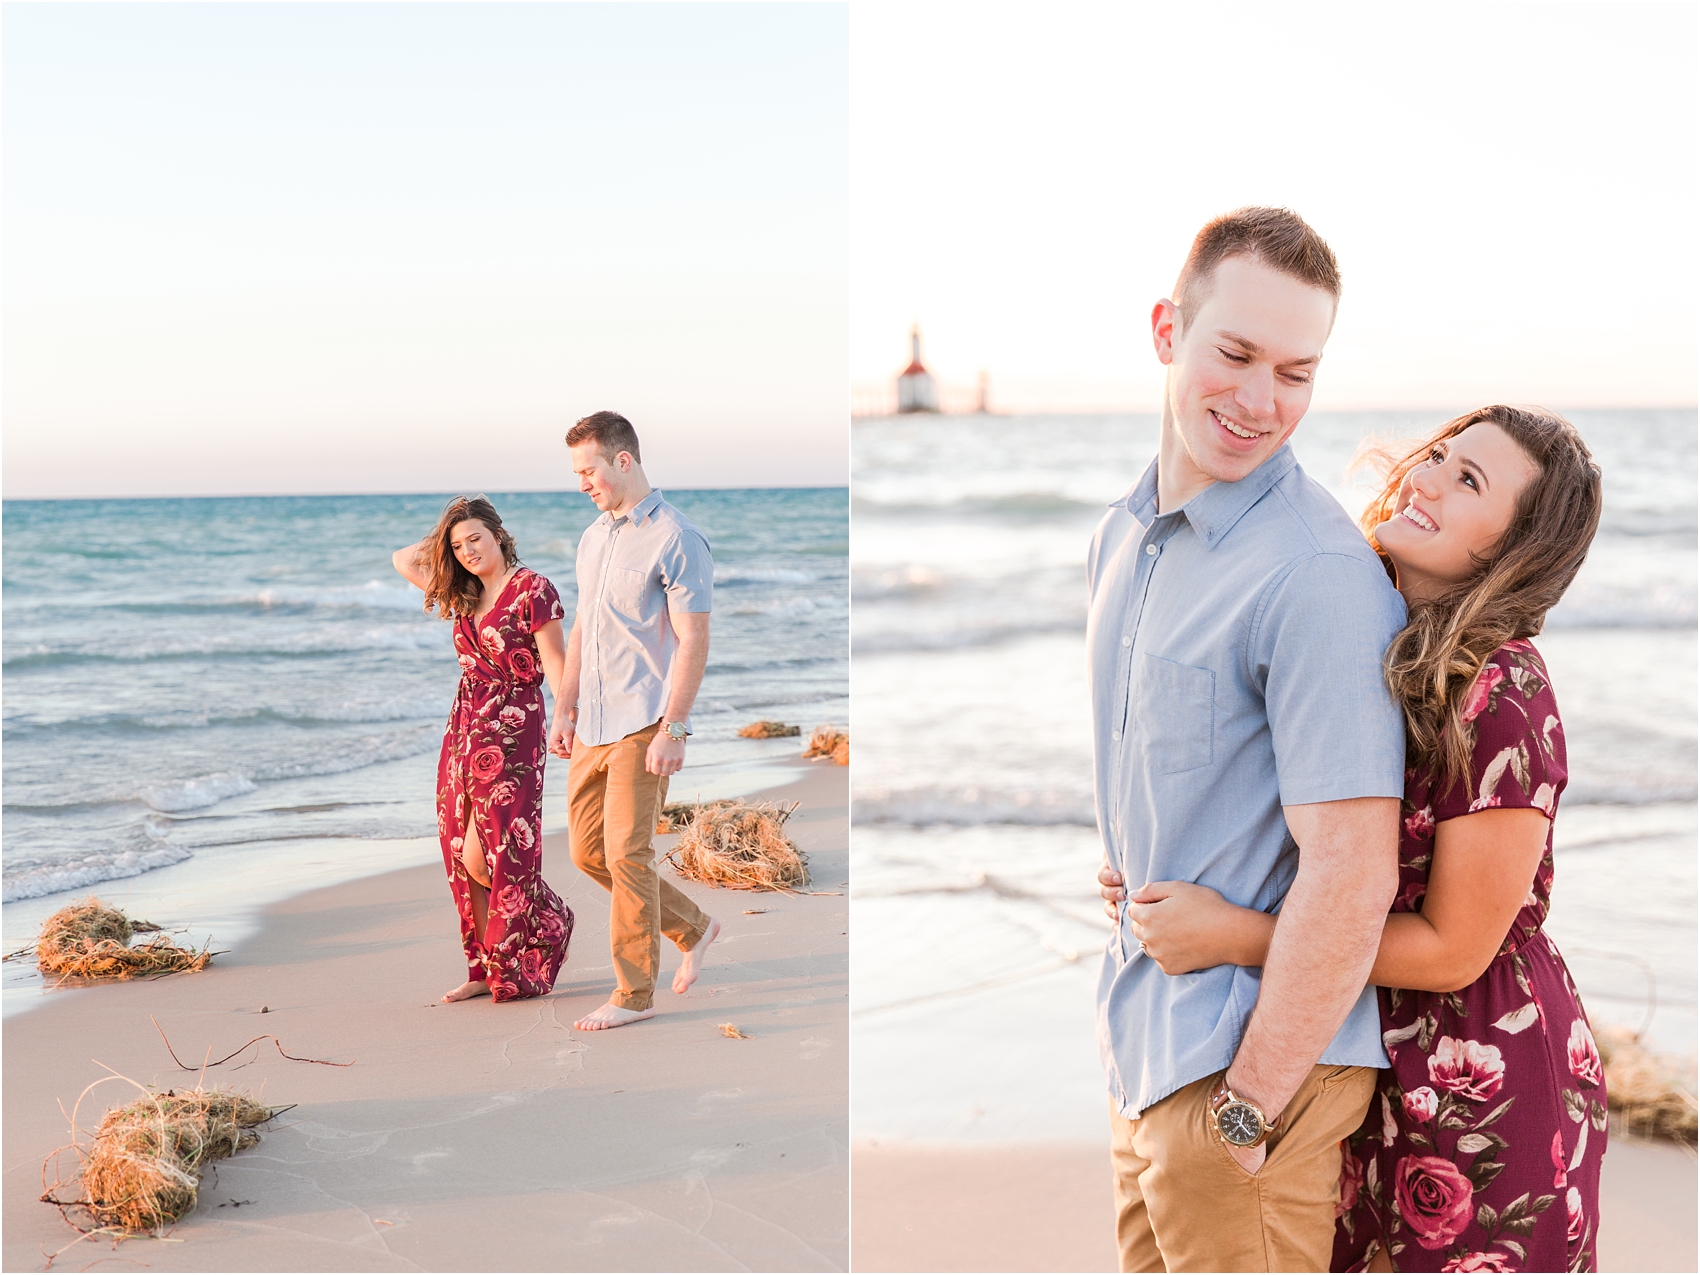 candid-end-of-summer-sunset-engagement-photos-at-silver-beach-in-st-joseph-mi-by-courtney-carolyn-photography_0028.jpg